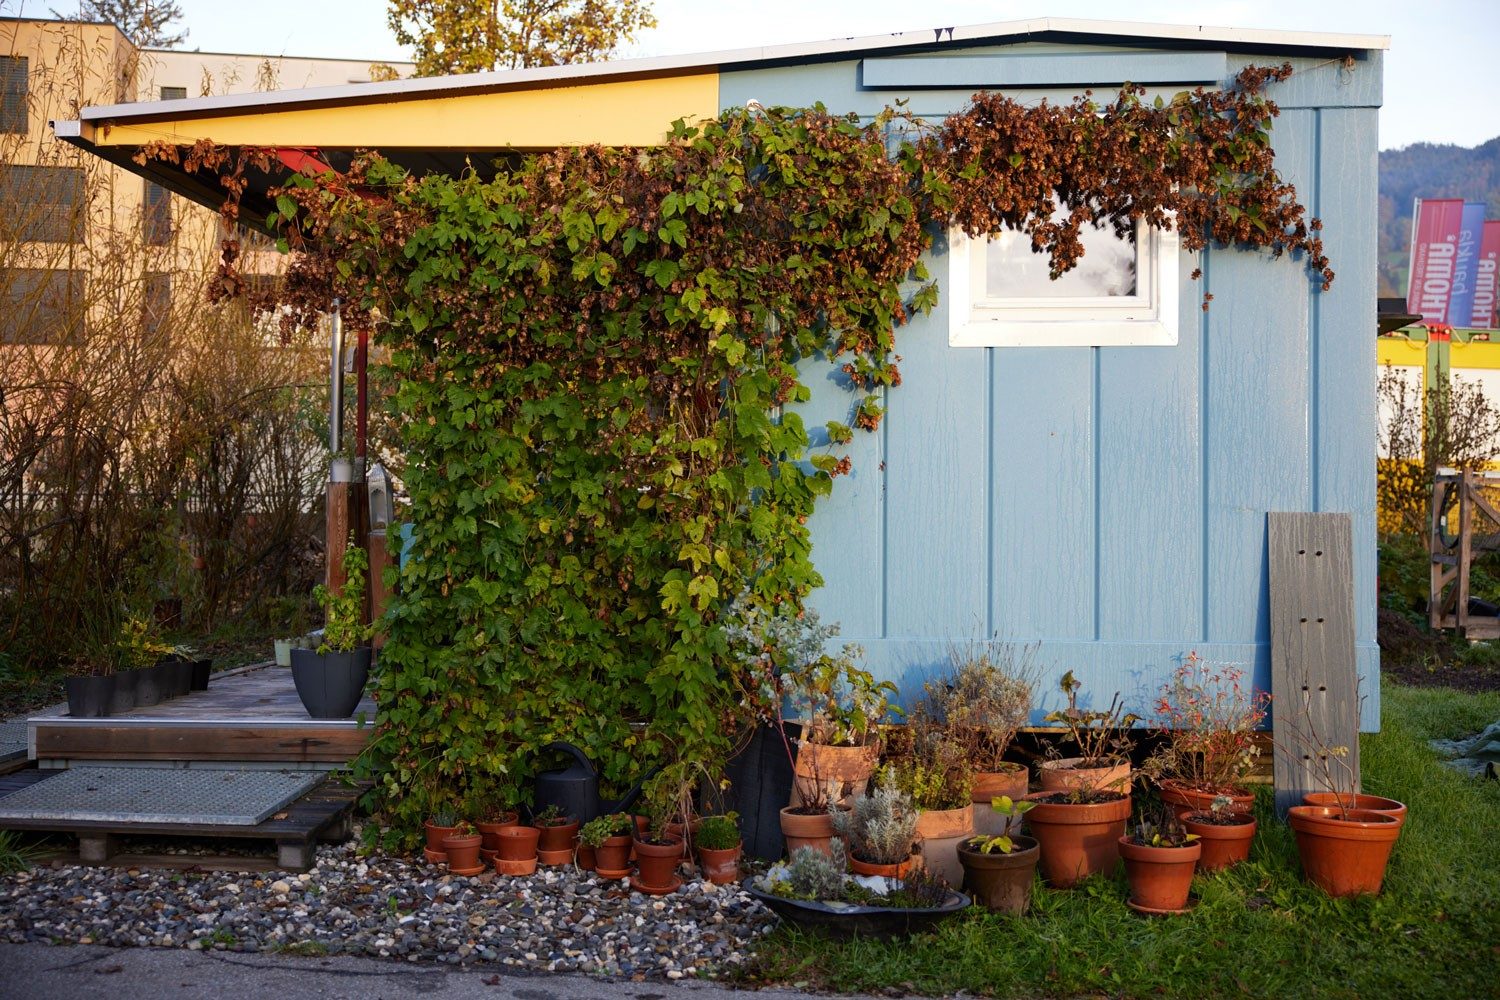 A shipping container house with plants growing on it